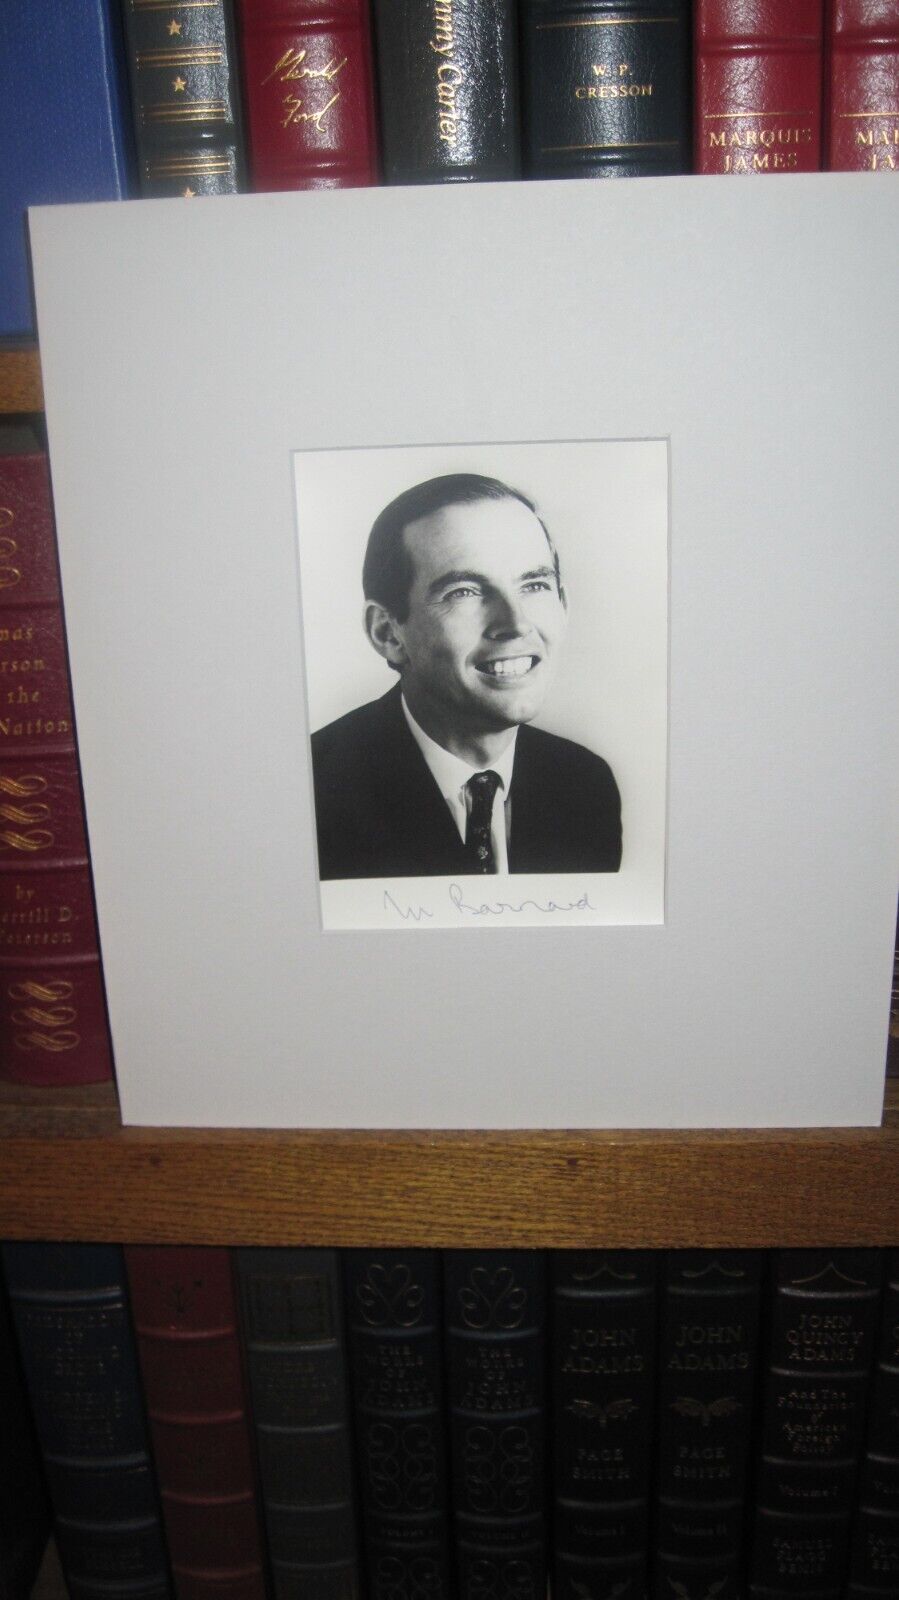 DR. CHRISTIAAN BARNARD SIGNED PHOTO MATTED.  DID FIRST HEART TRANSPLANT